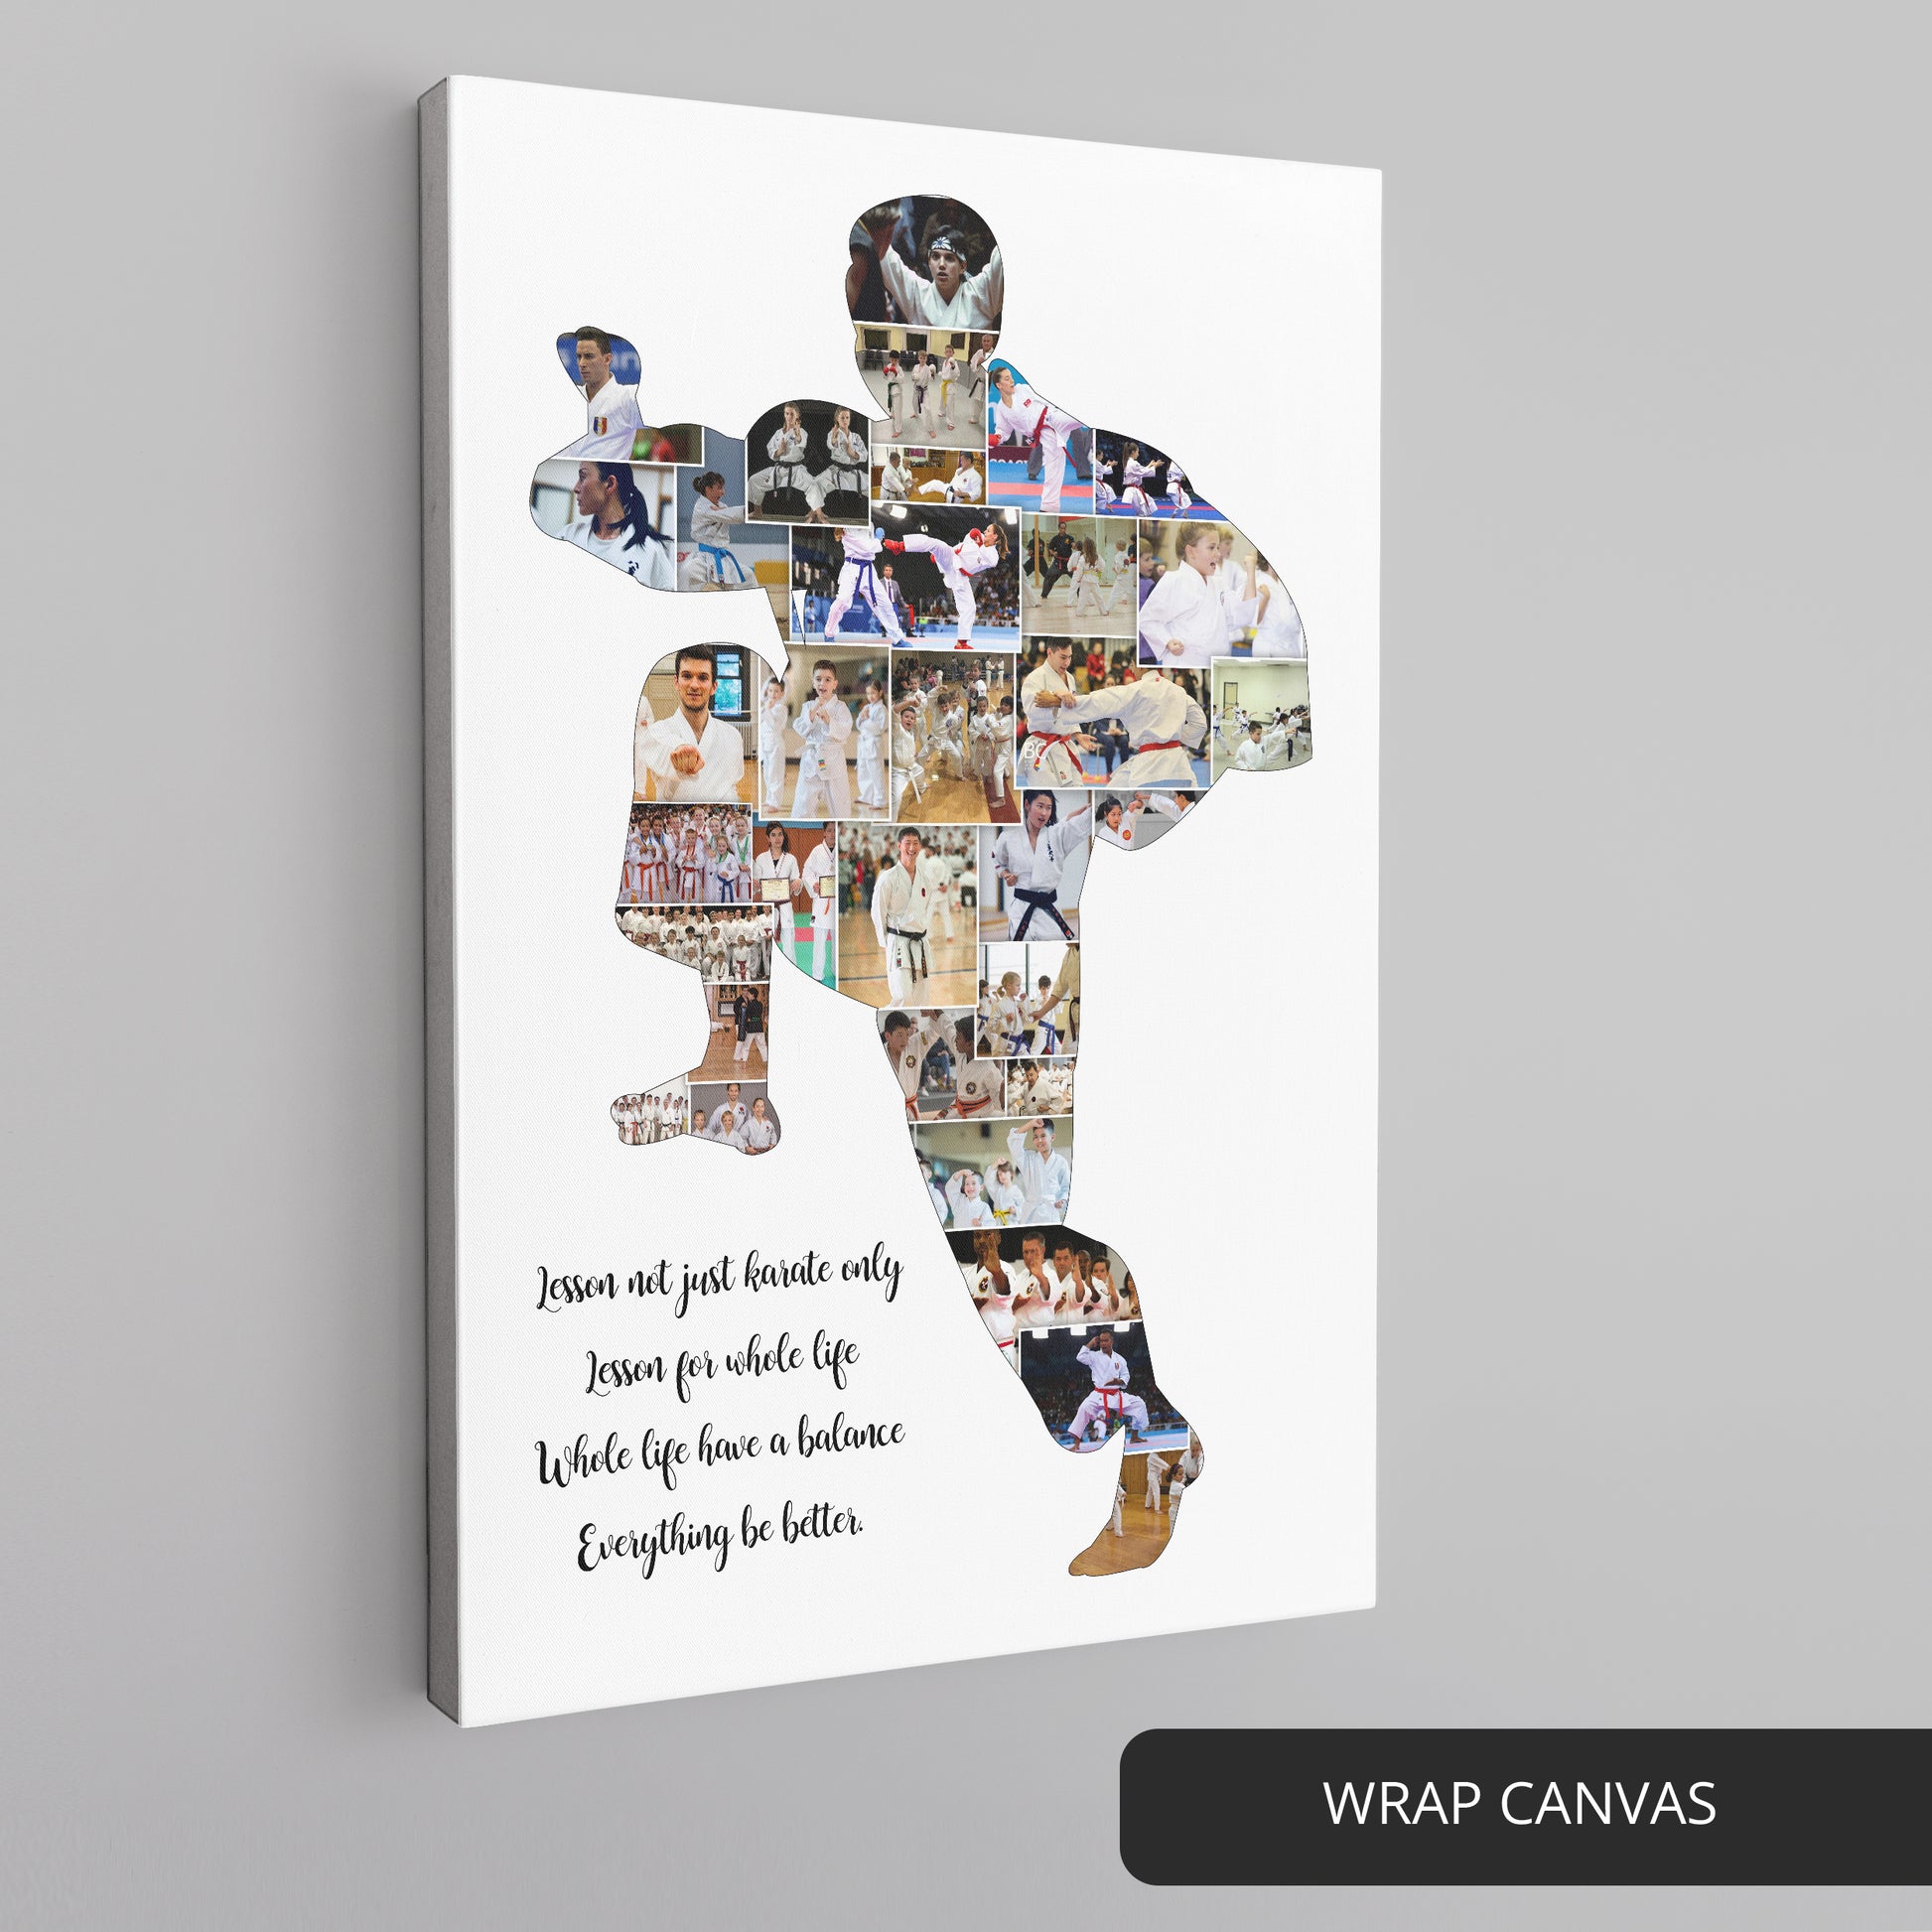 Thoughtful Taekwondo Gifts: Photo Collage for Martial Arts Enthusiasts